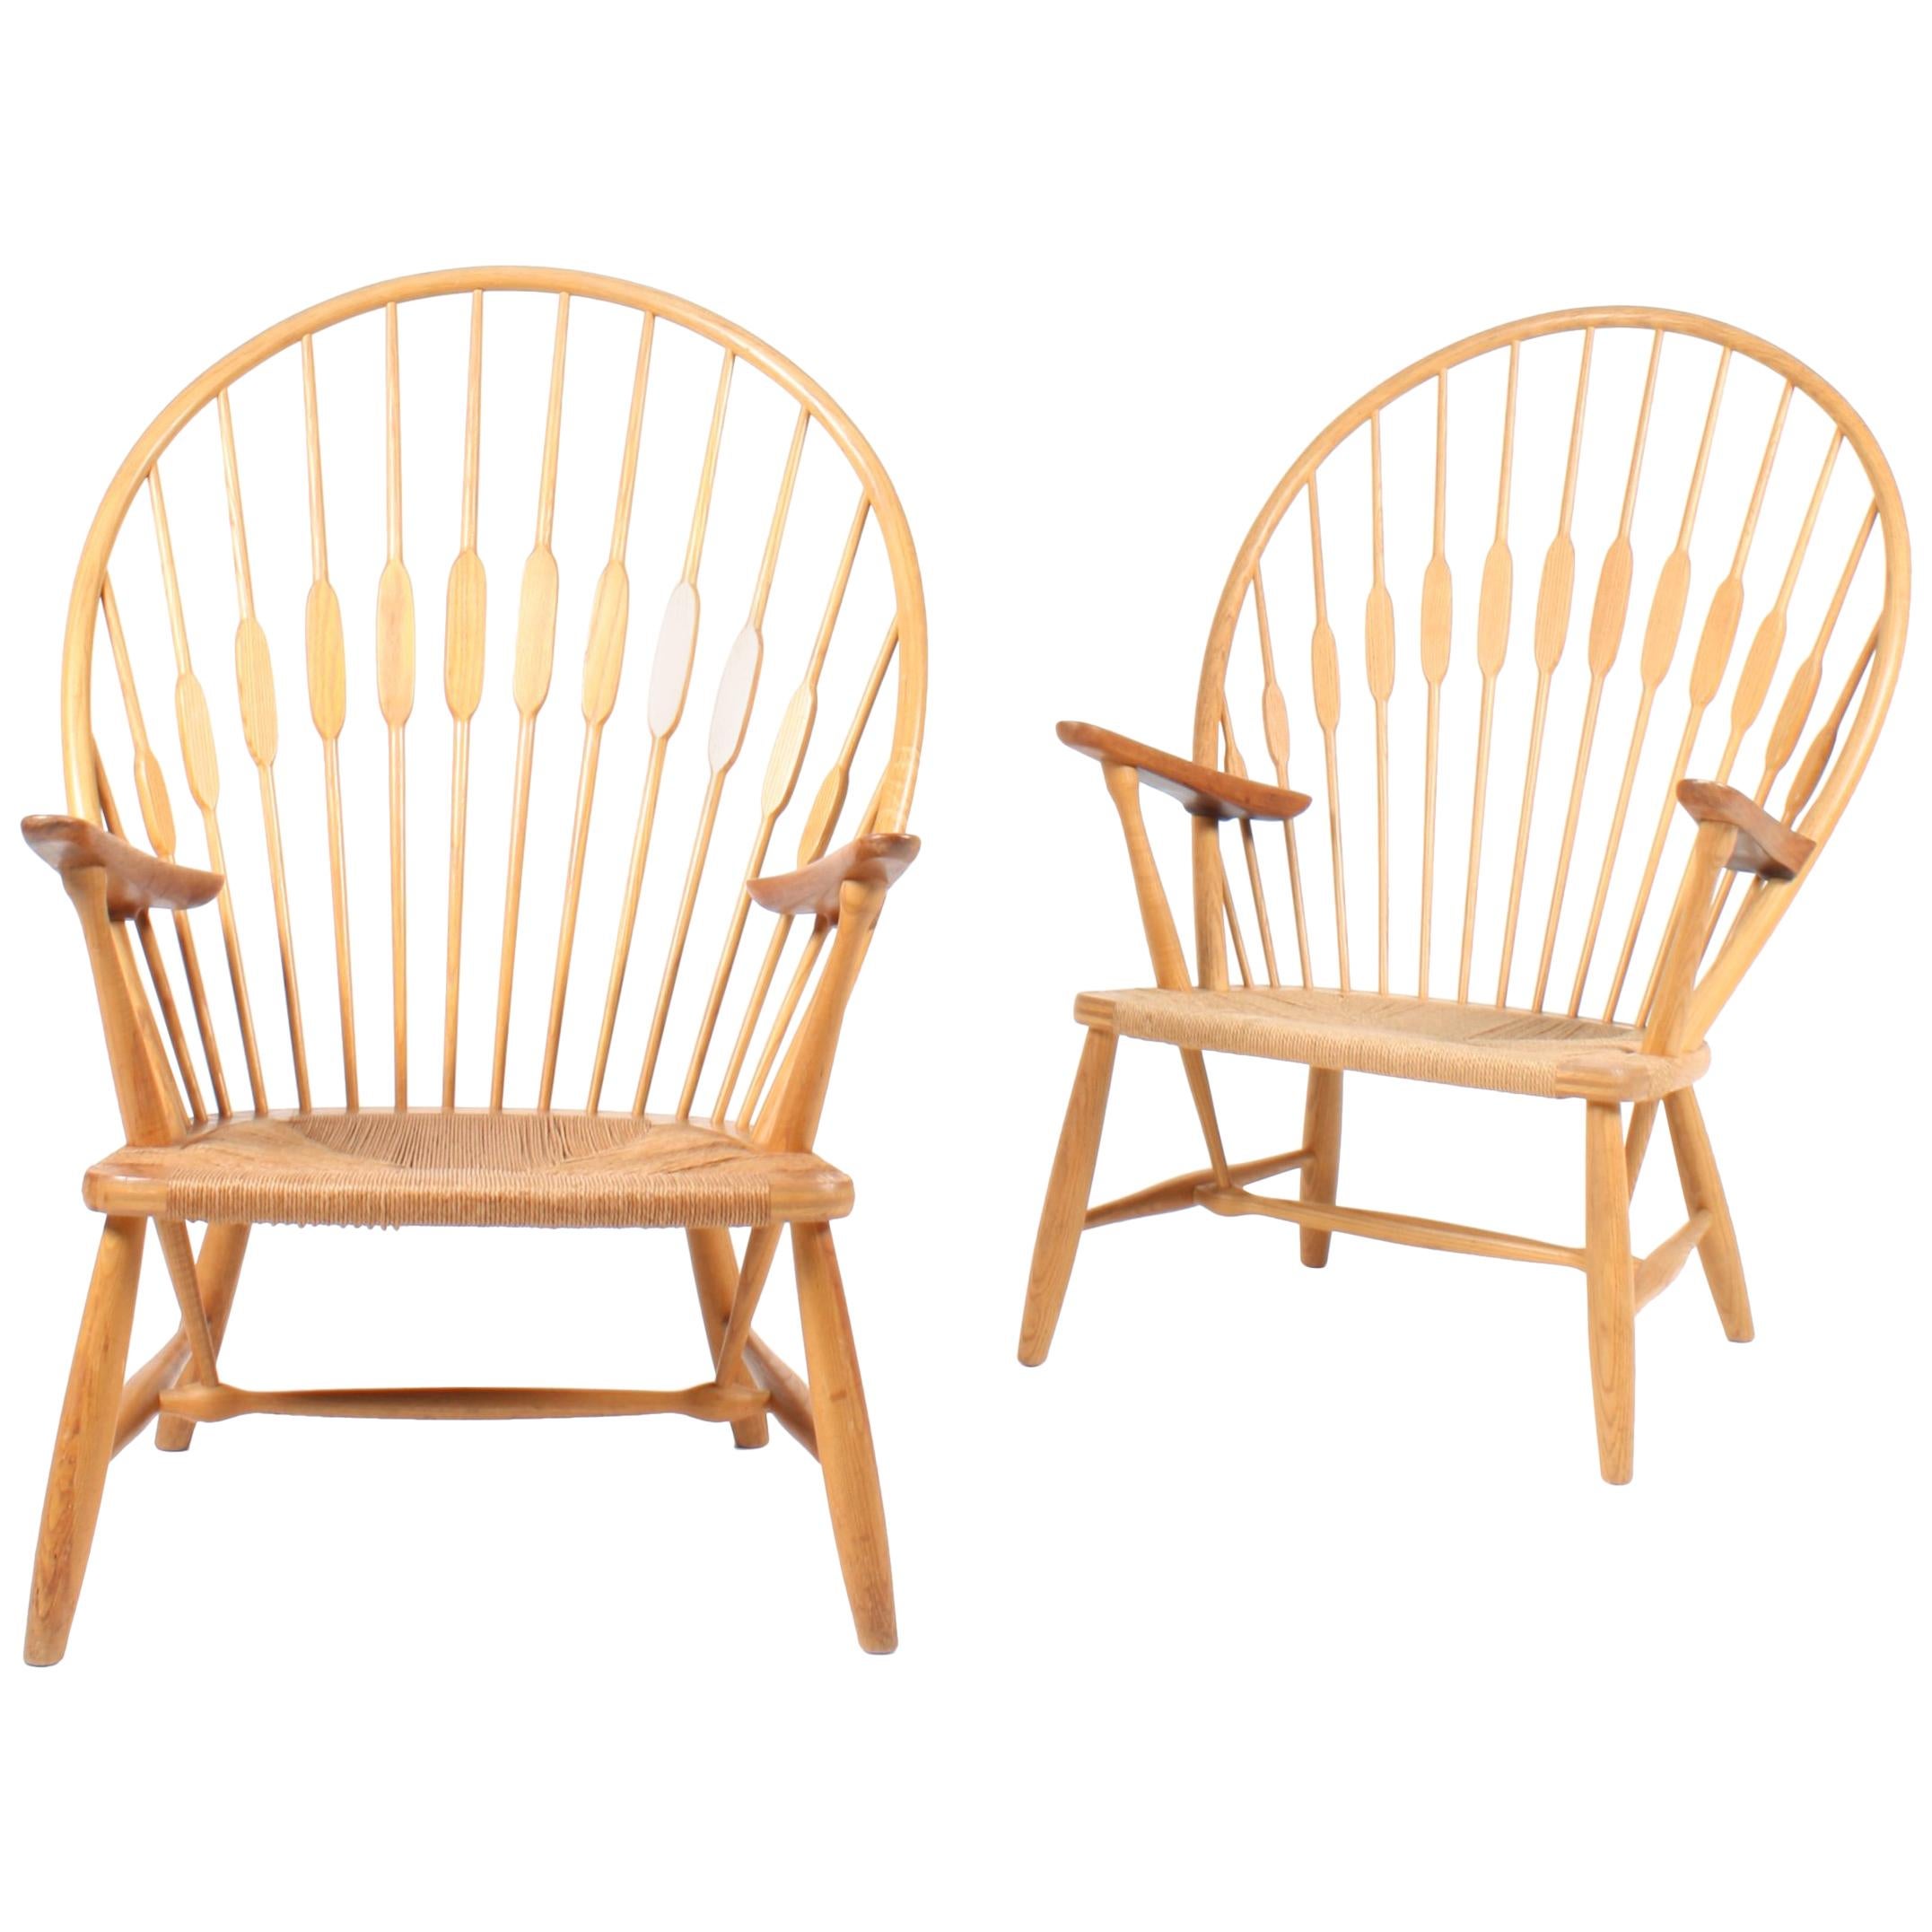 Pair of Pristine Peacock Chairs by Wegner